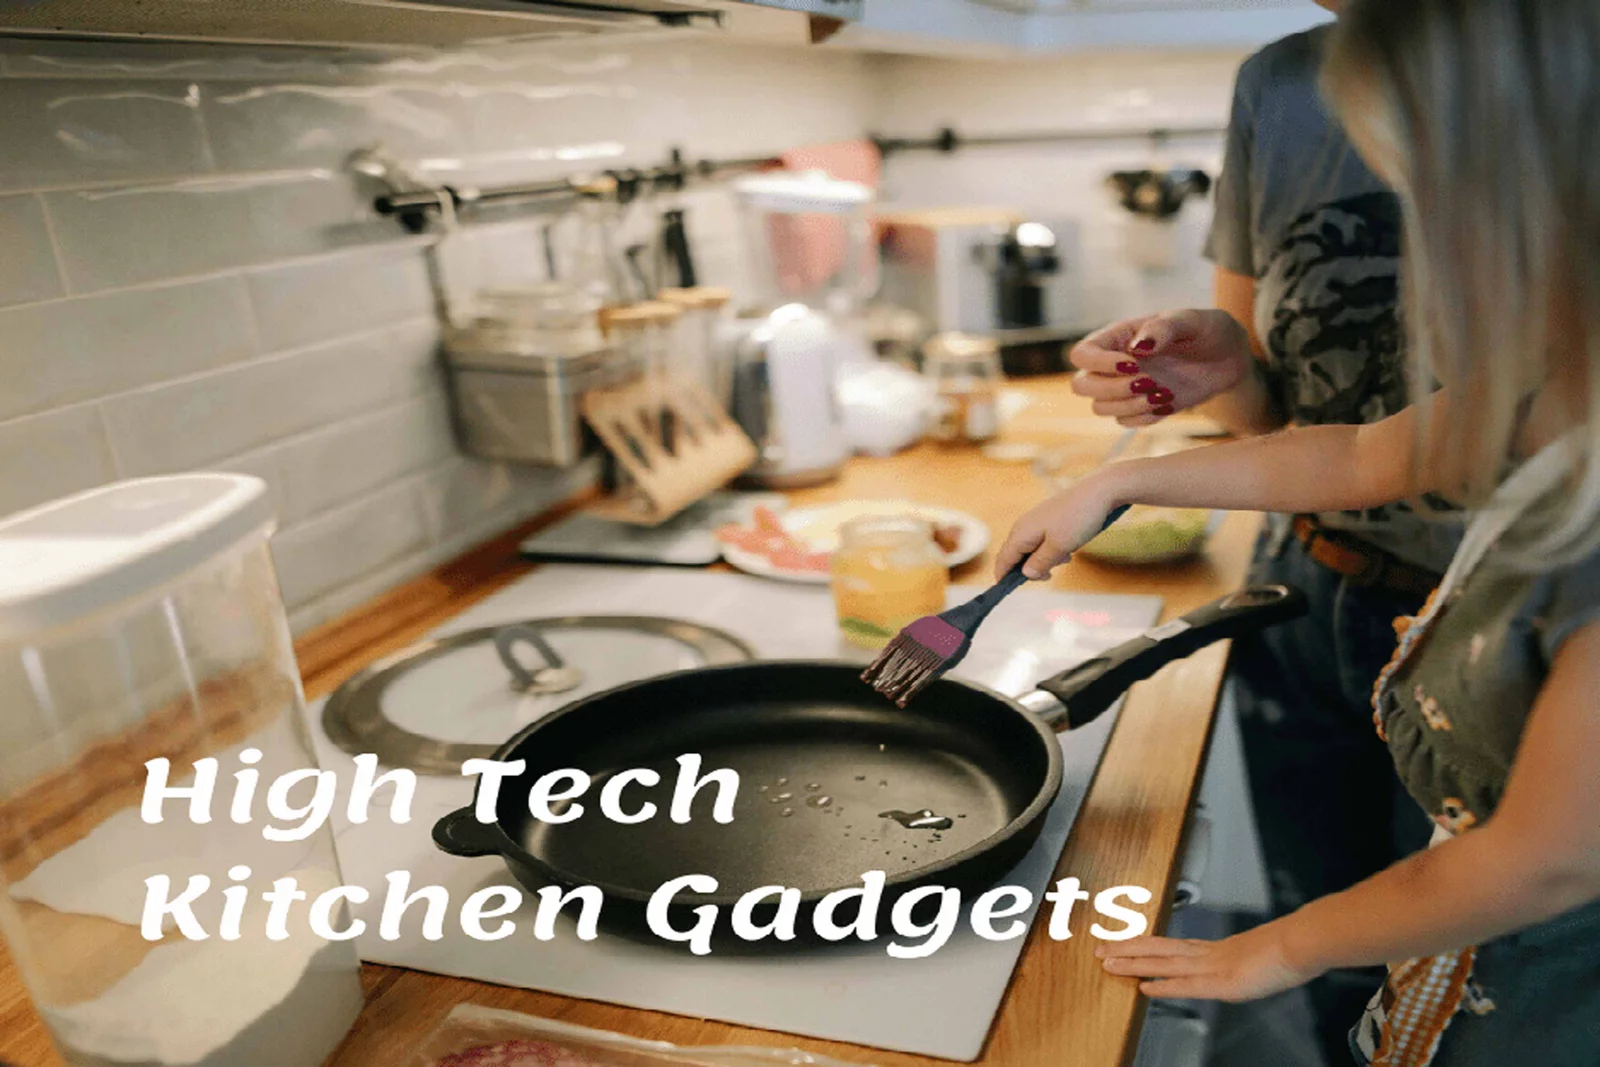 High Tech Kitchen Gadgets You Need in 2020